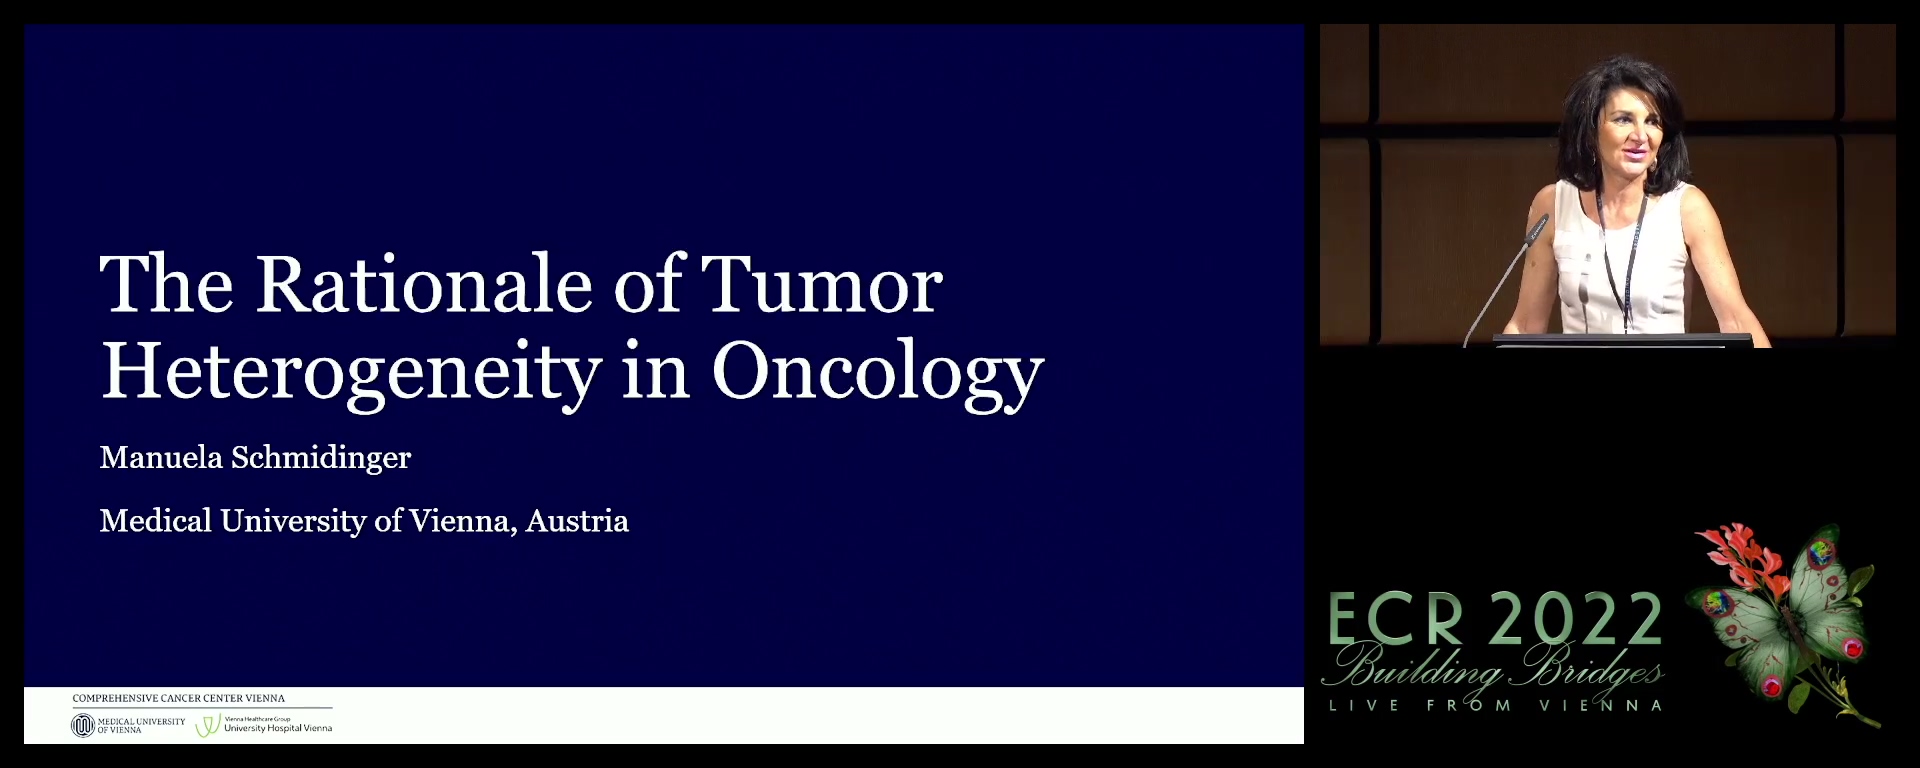 The oncologist: the rationale of tumour heterogeneity in oncology